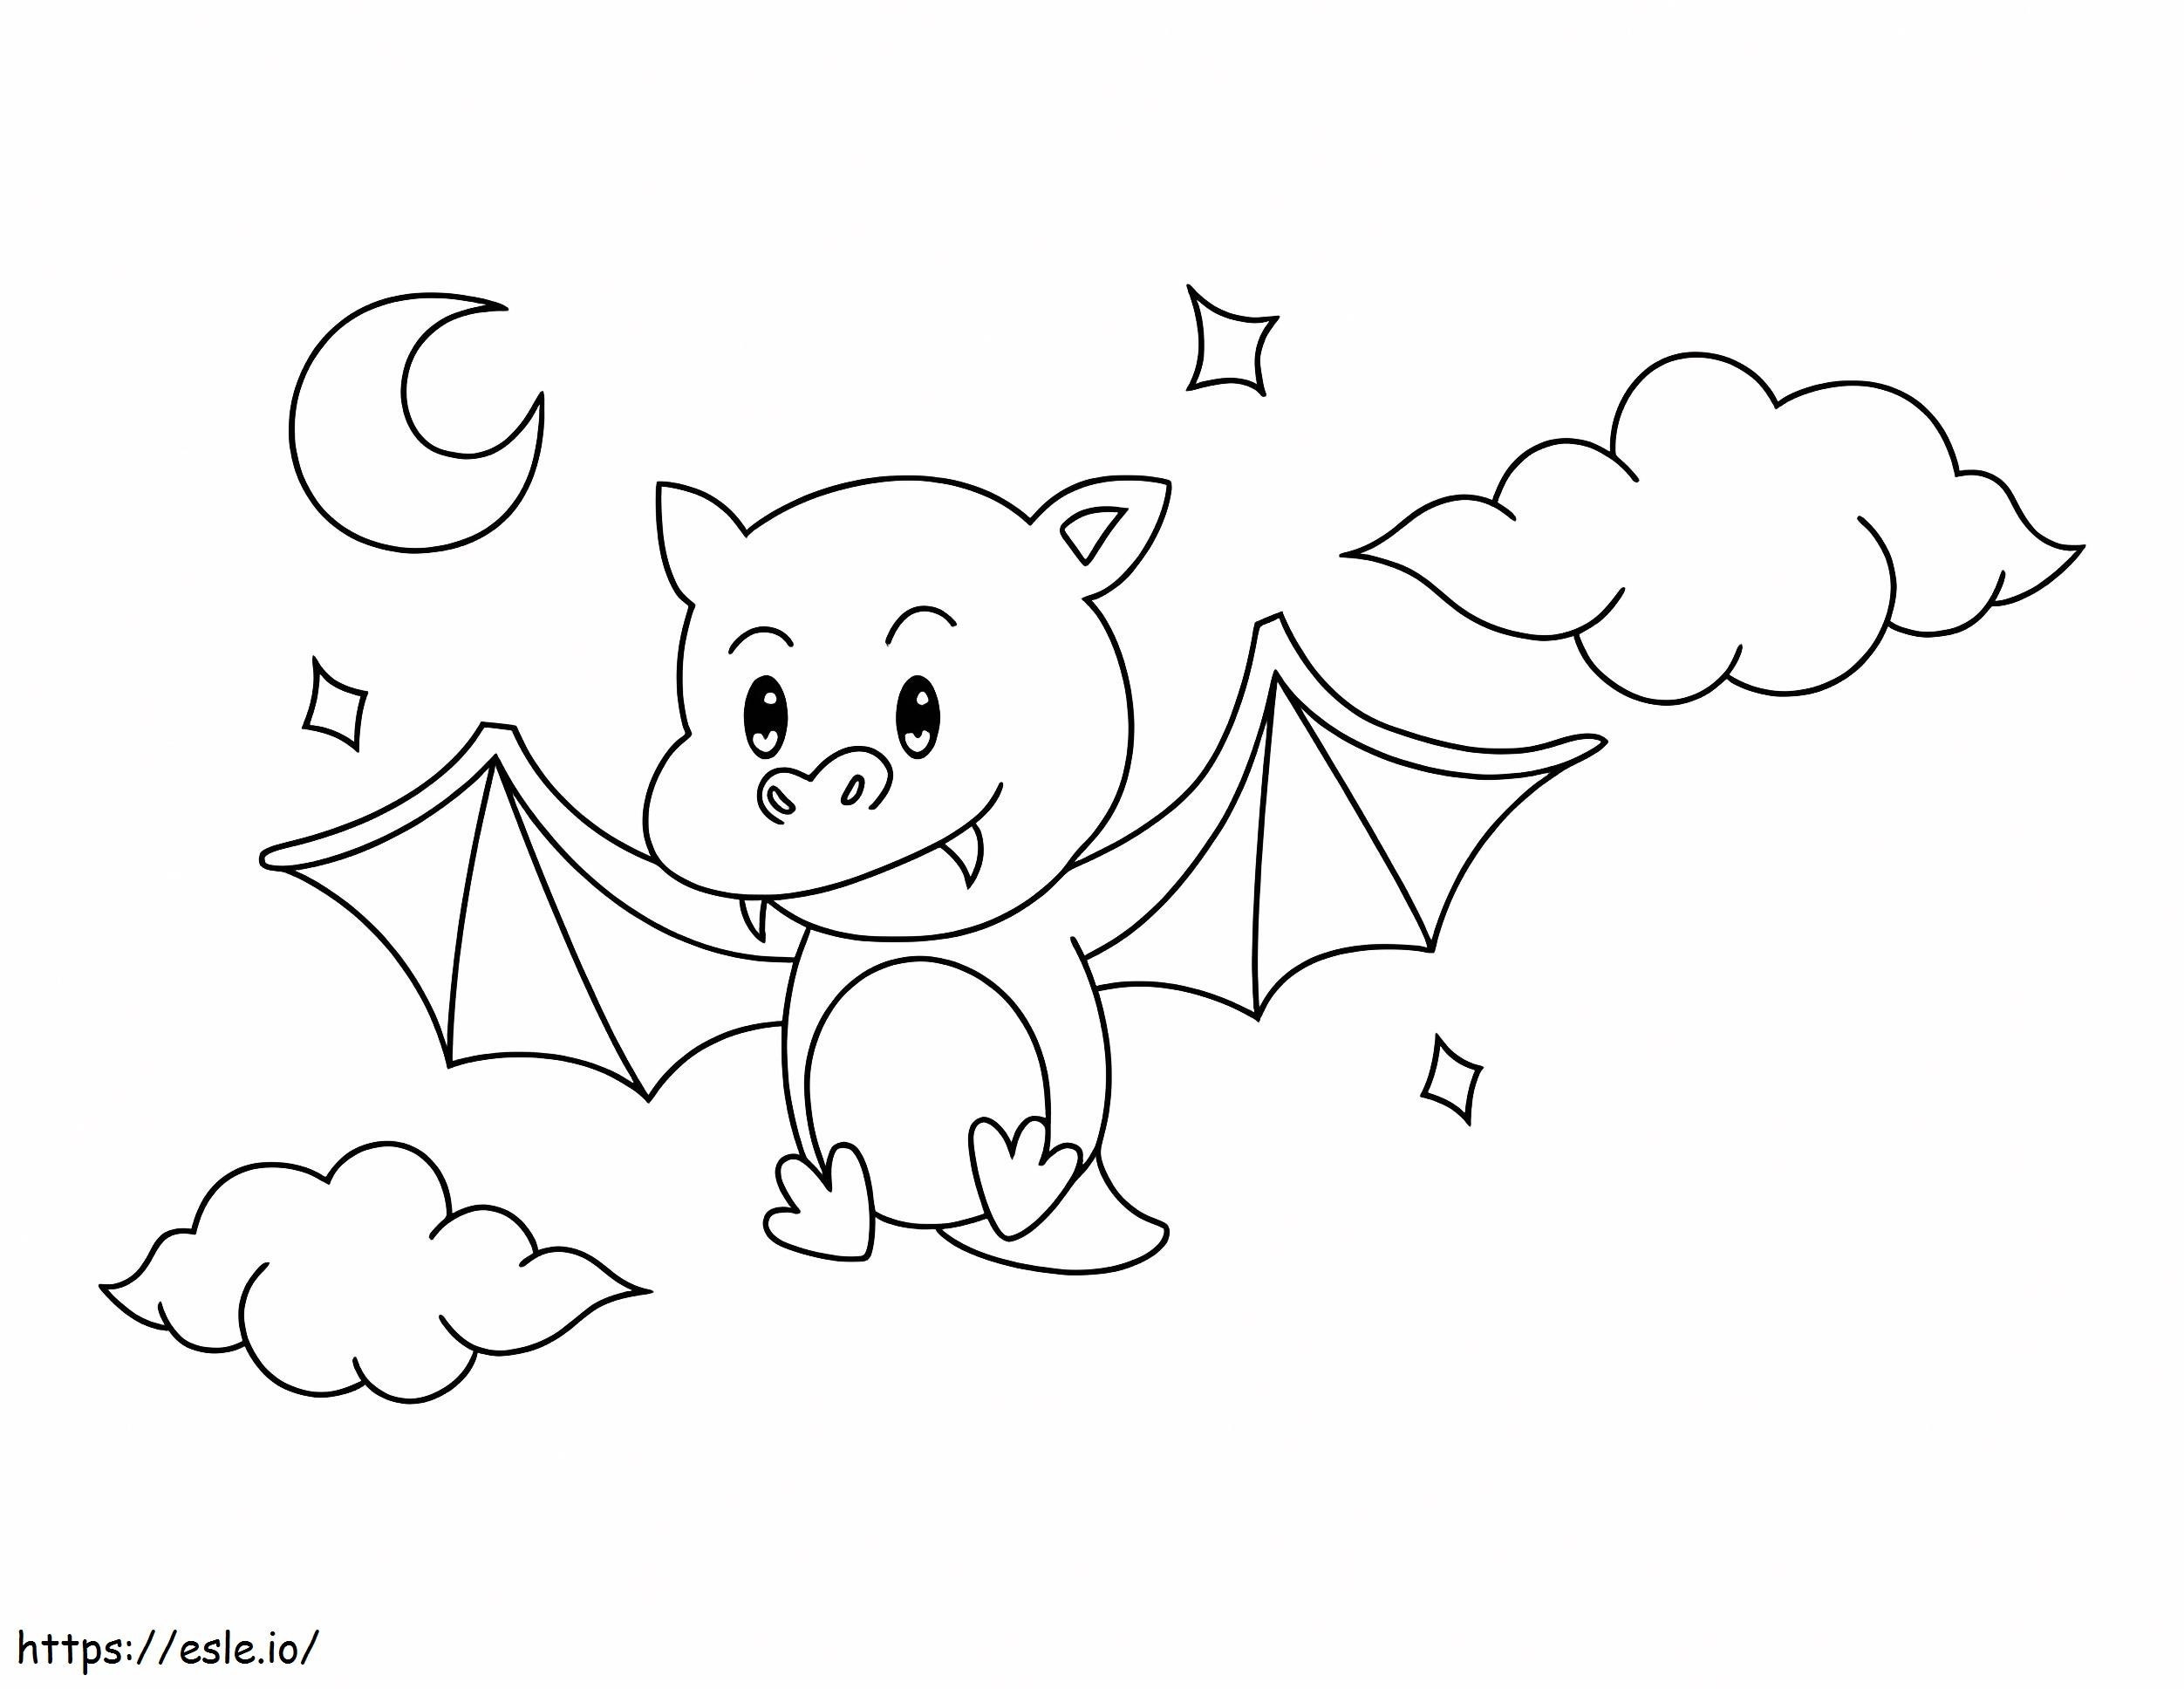 Vampire Bat Flying With Cloud coloring page